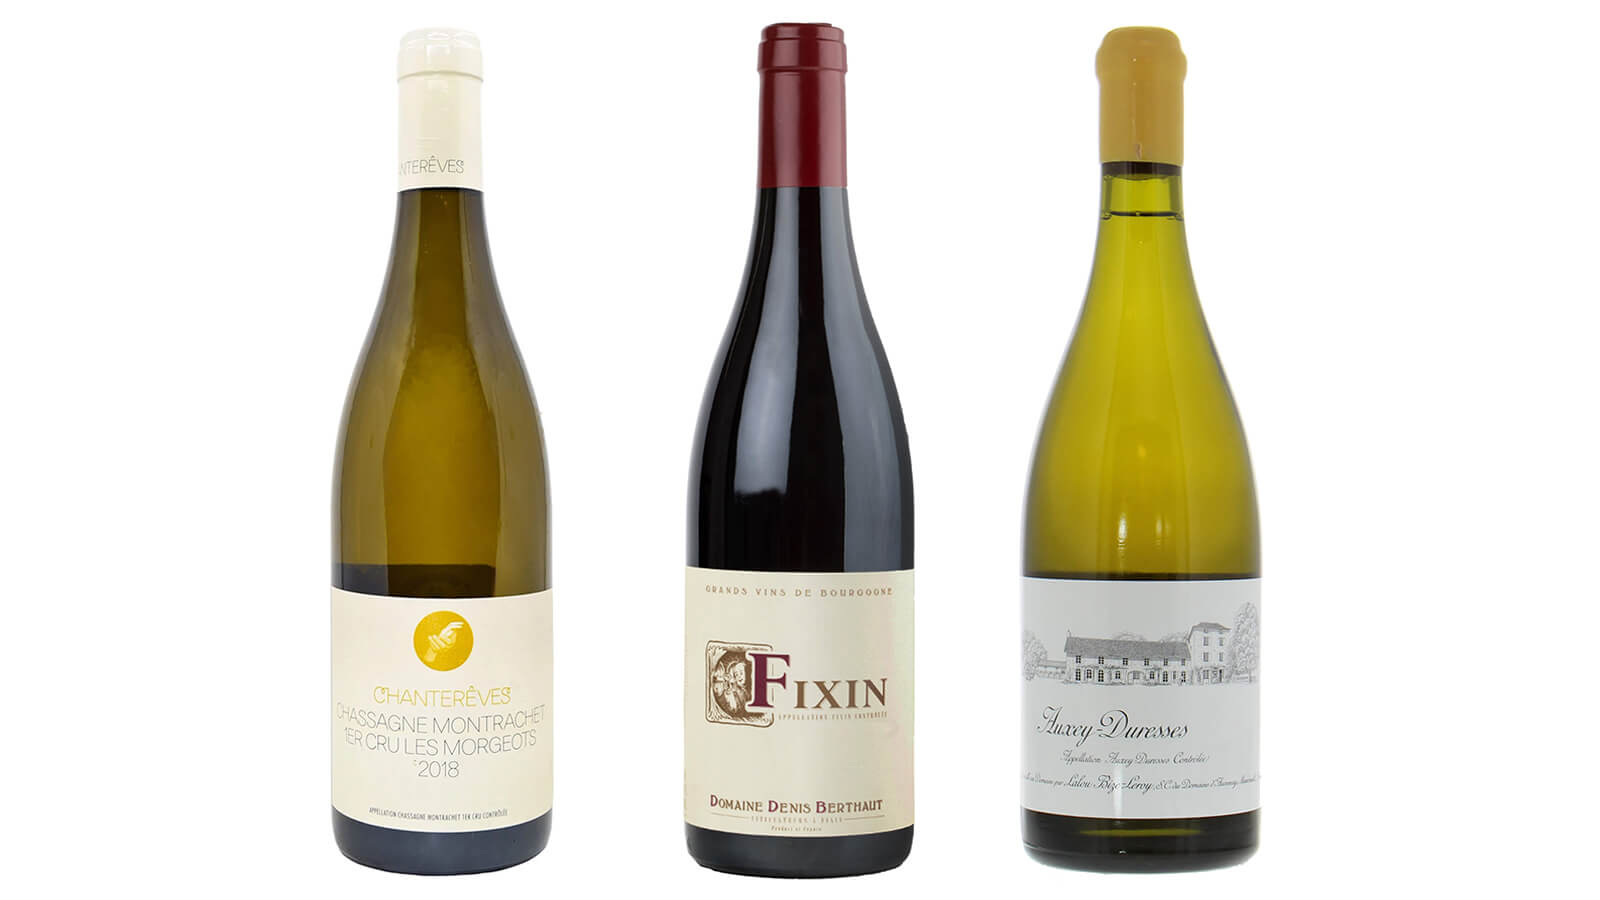 Finding outstanding equality in Burgundy